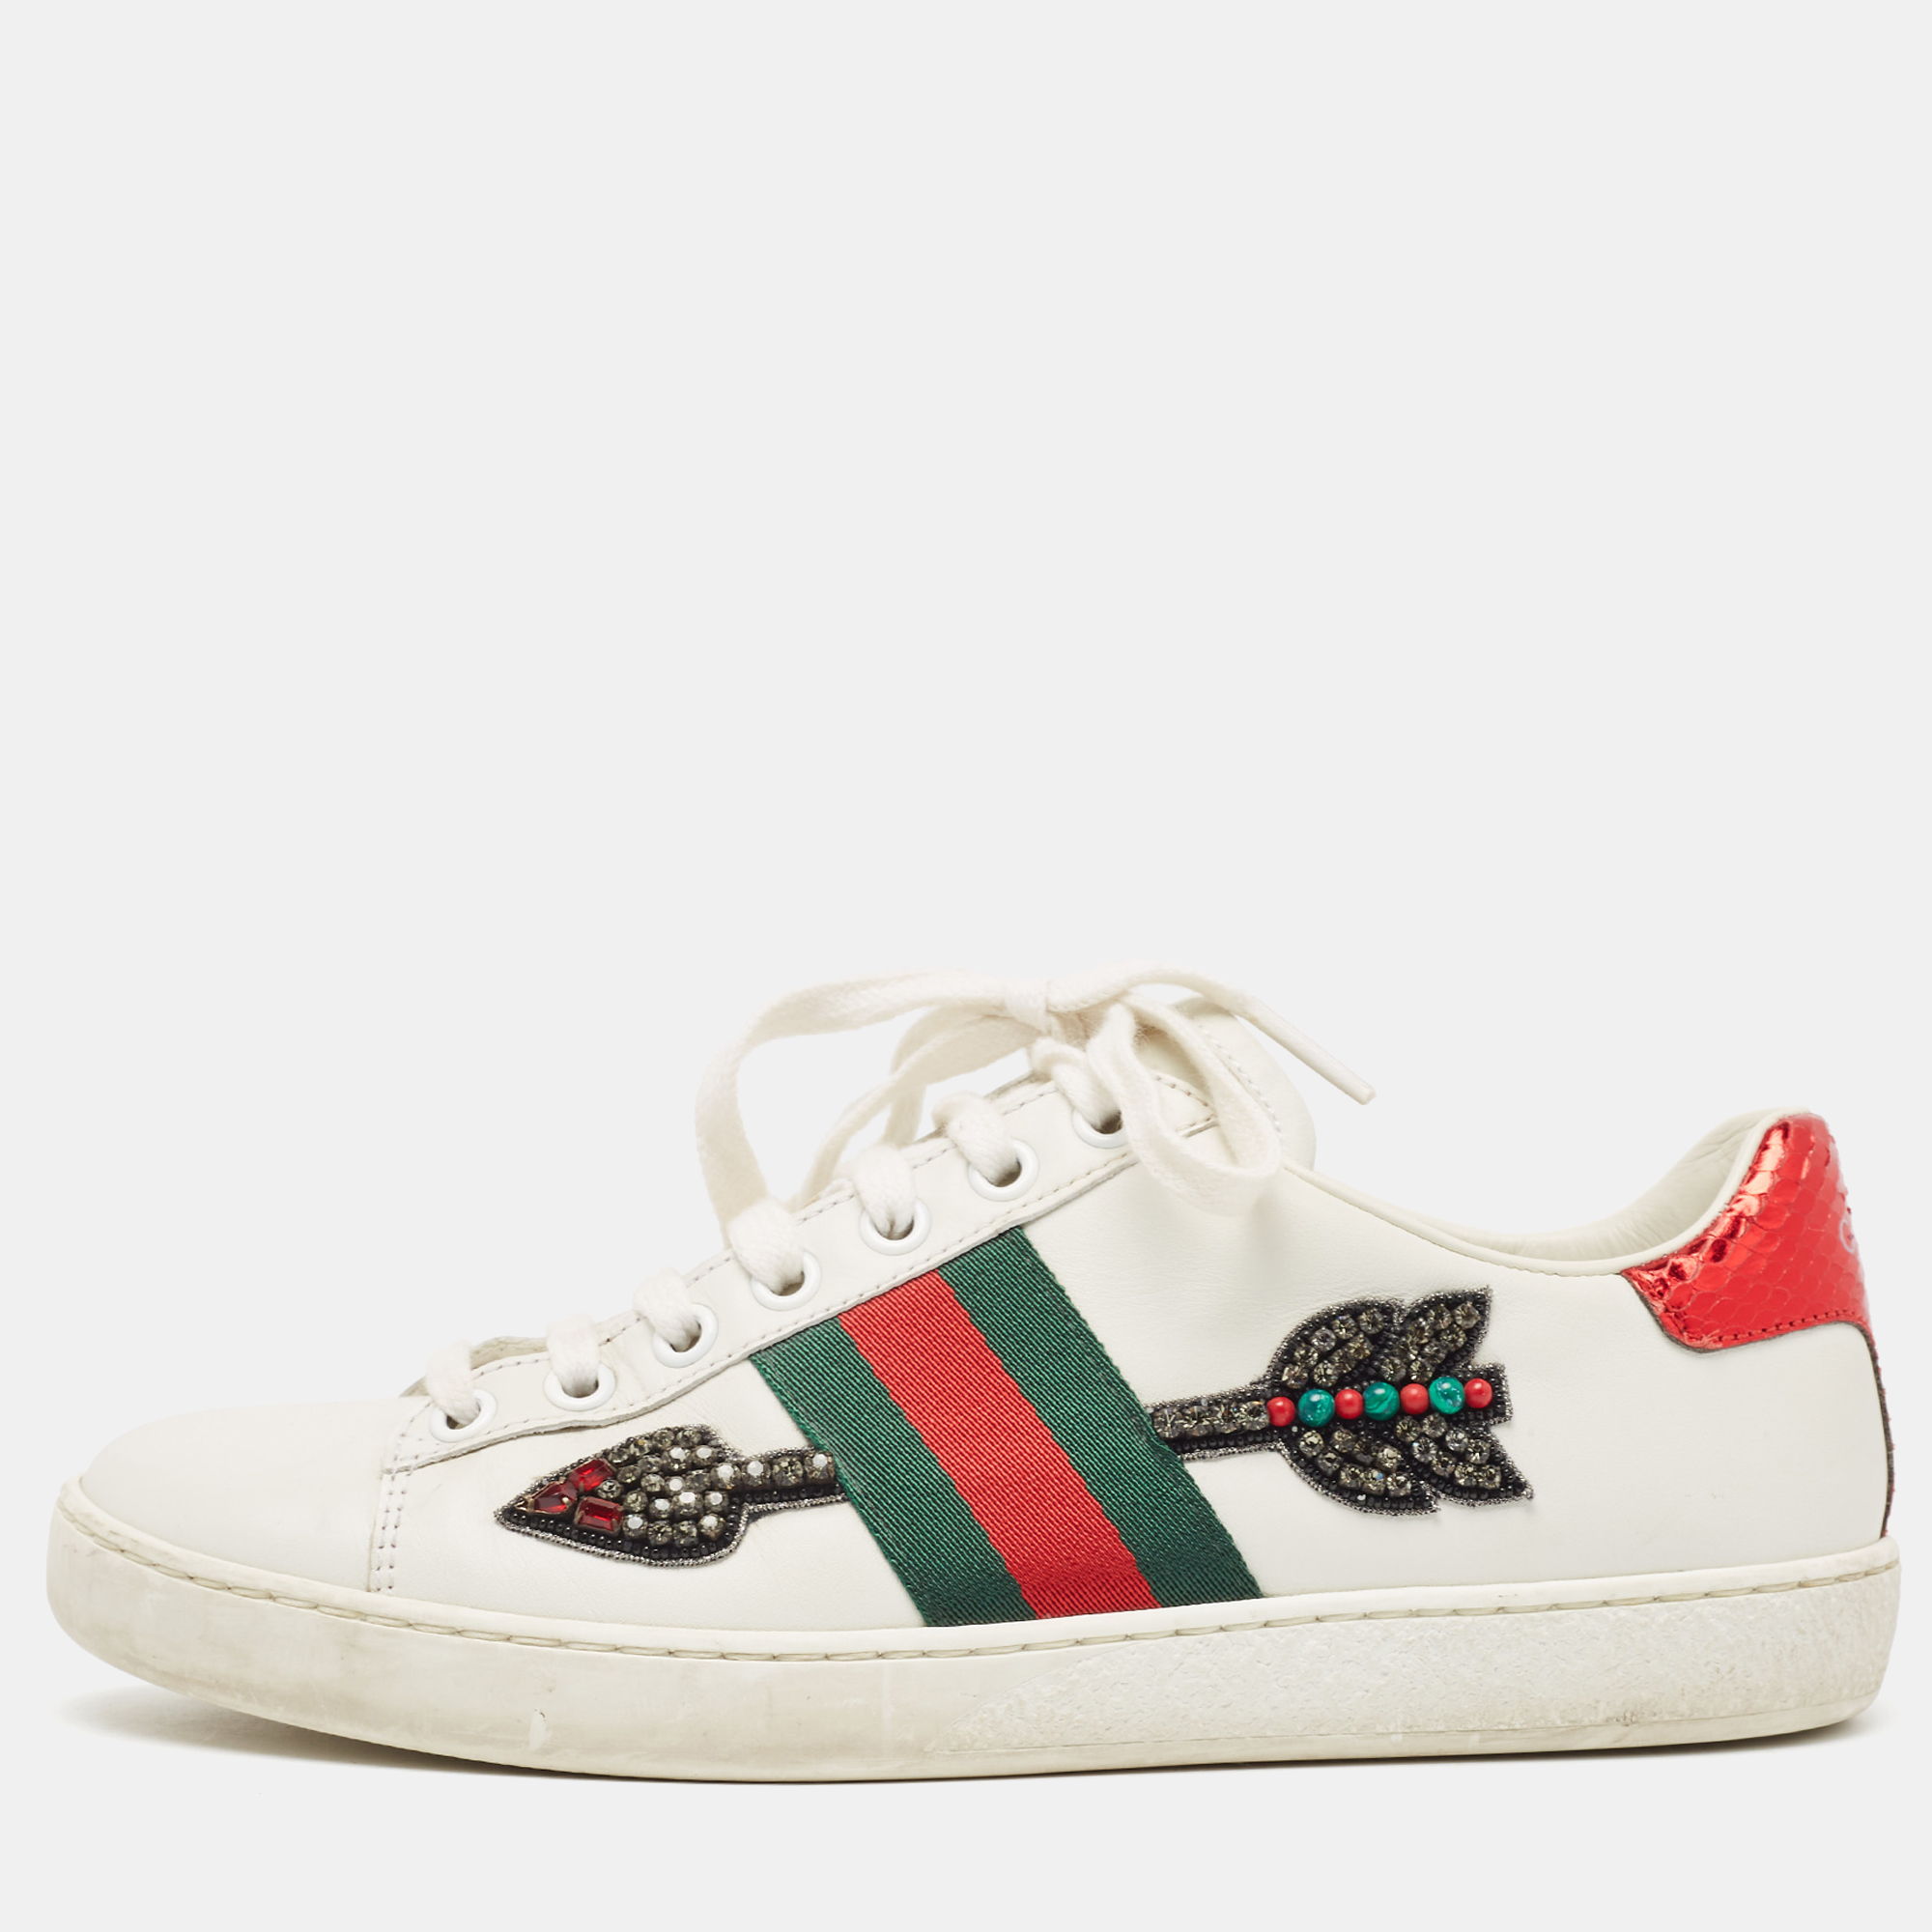 Pre-owned Gucci White Leather Embellished Arrow Ace Sneakers Size 36